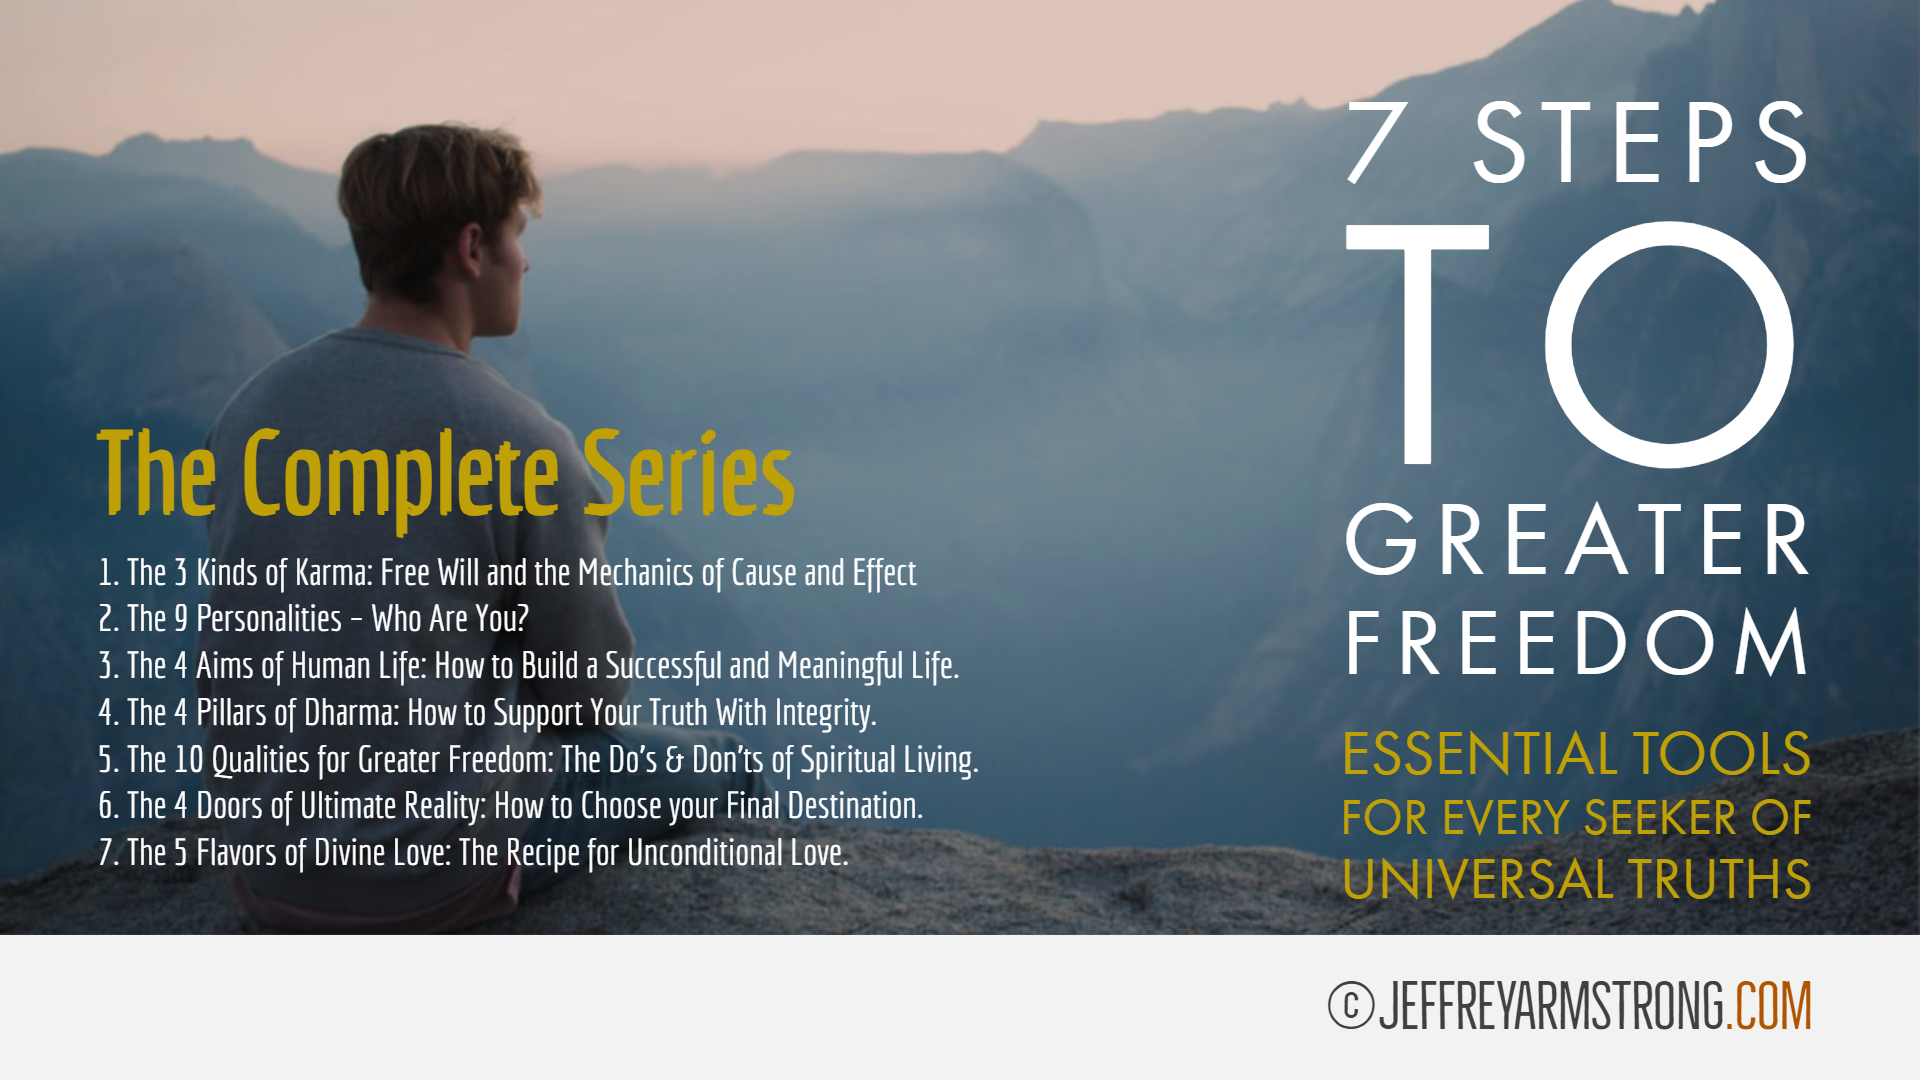 7 Steps to Greater Freedom (7 Lessons)